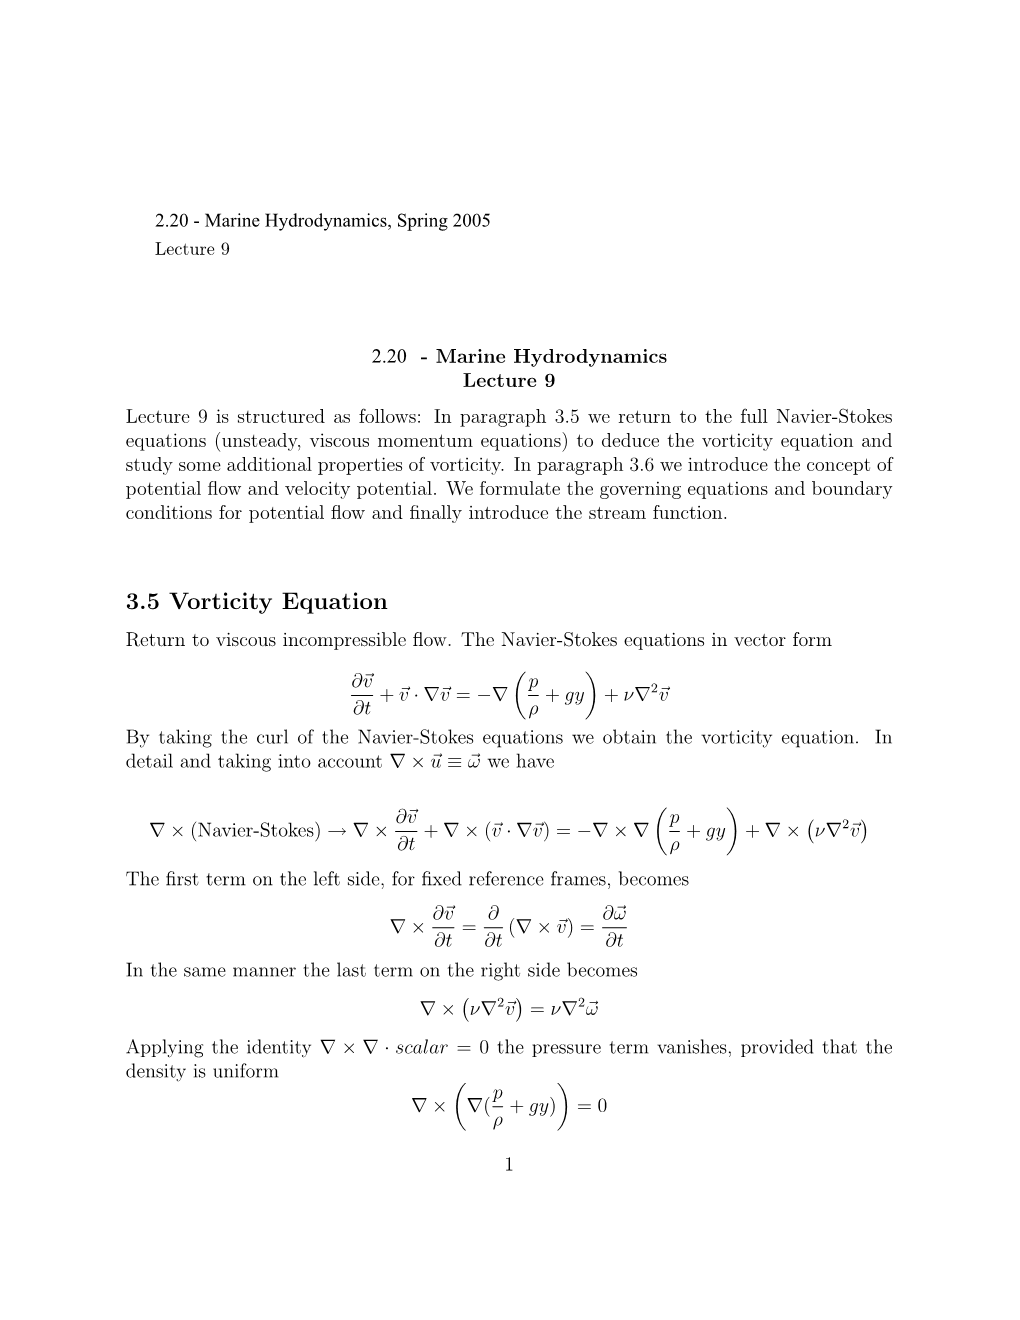 3.5 Vorticity Equation Return to Viscous Incompressible ﬂow